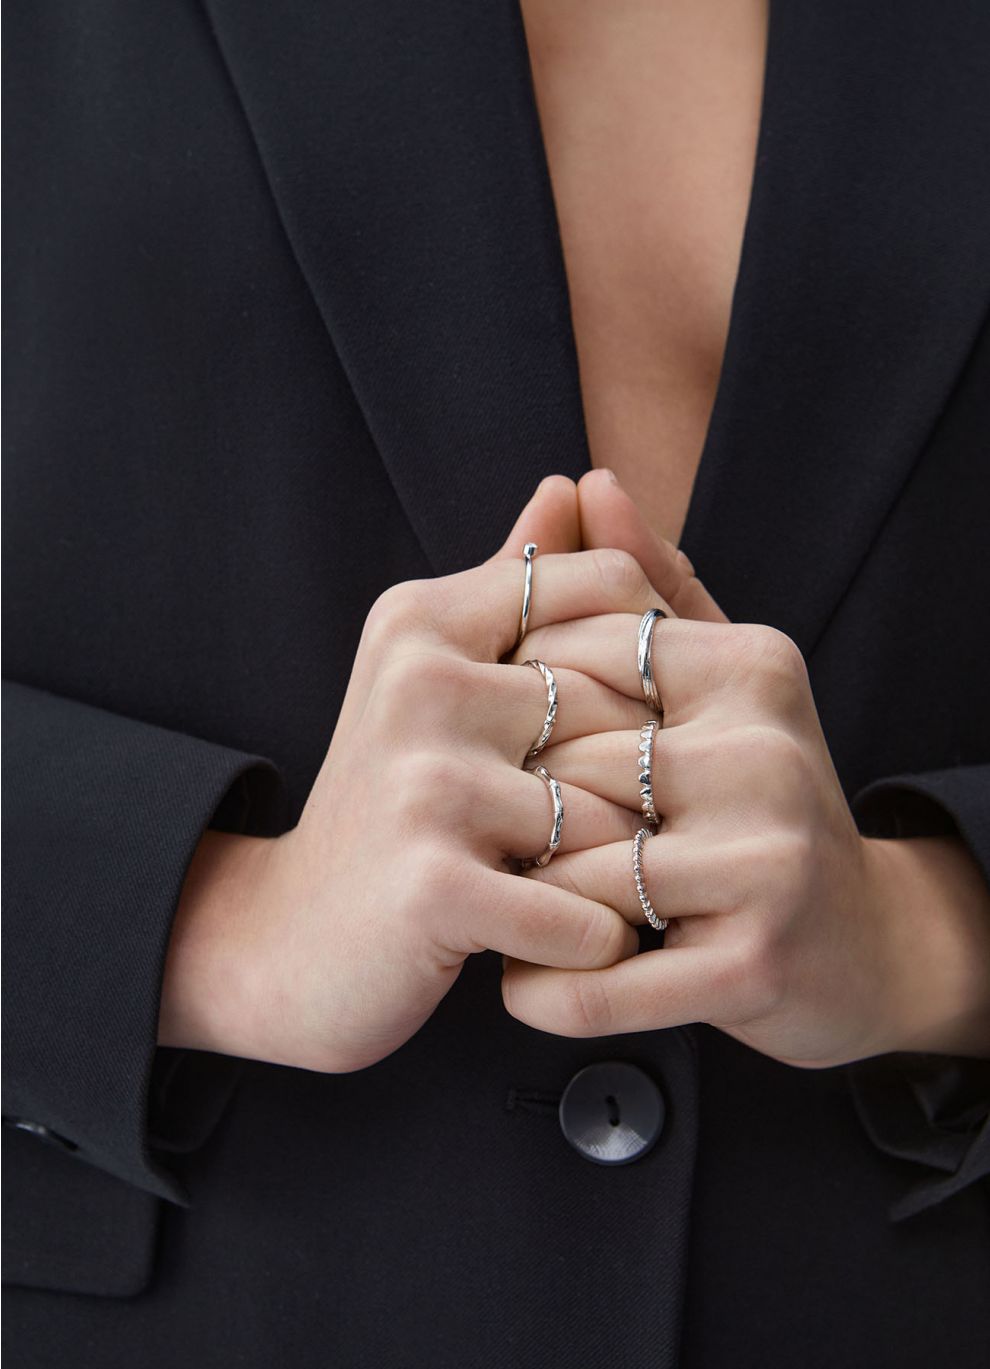 Nail Ring 3 Mens Rings Rings For Women Carti Ring Designer Ring Love Ring  Engagement Wedding Gift Couple Fashion Accessories Size 5 11 Luxury Ring  Ring Men From Fashion1202, $10.46 | DHgate.Com